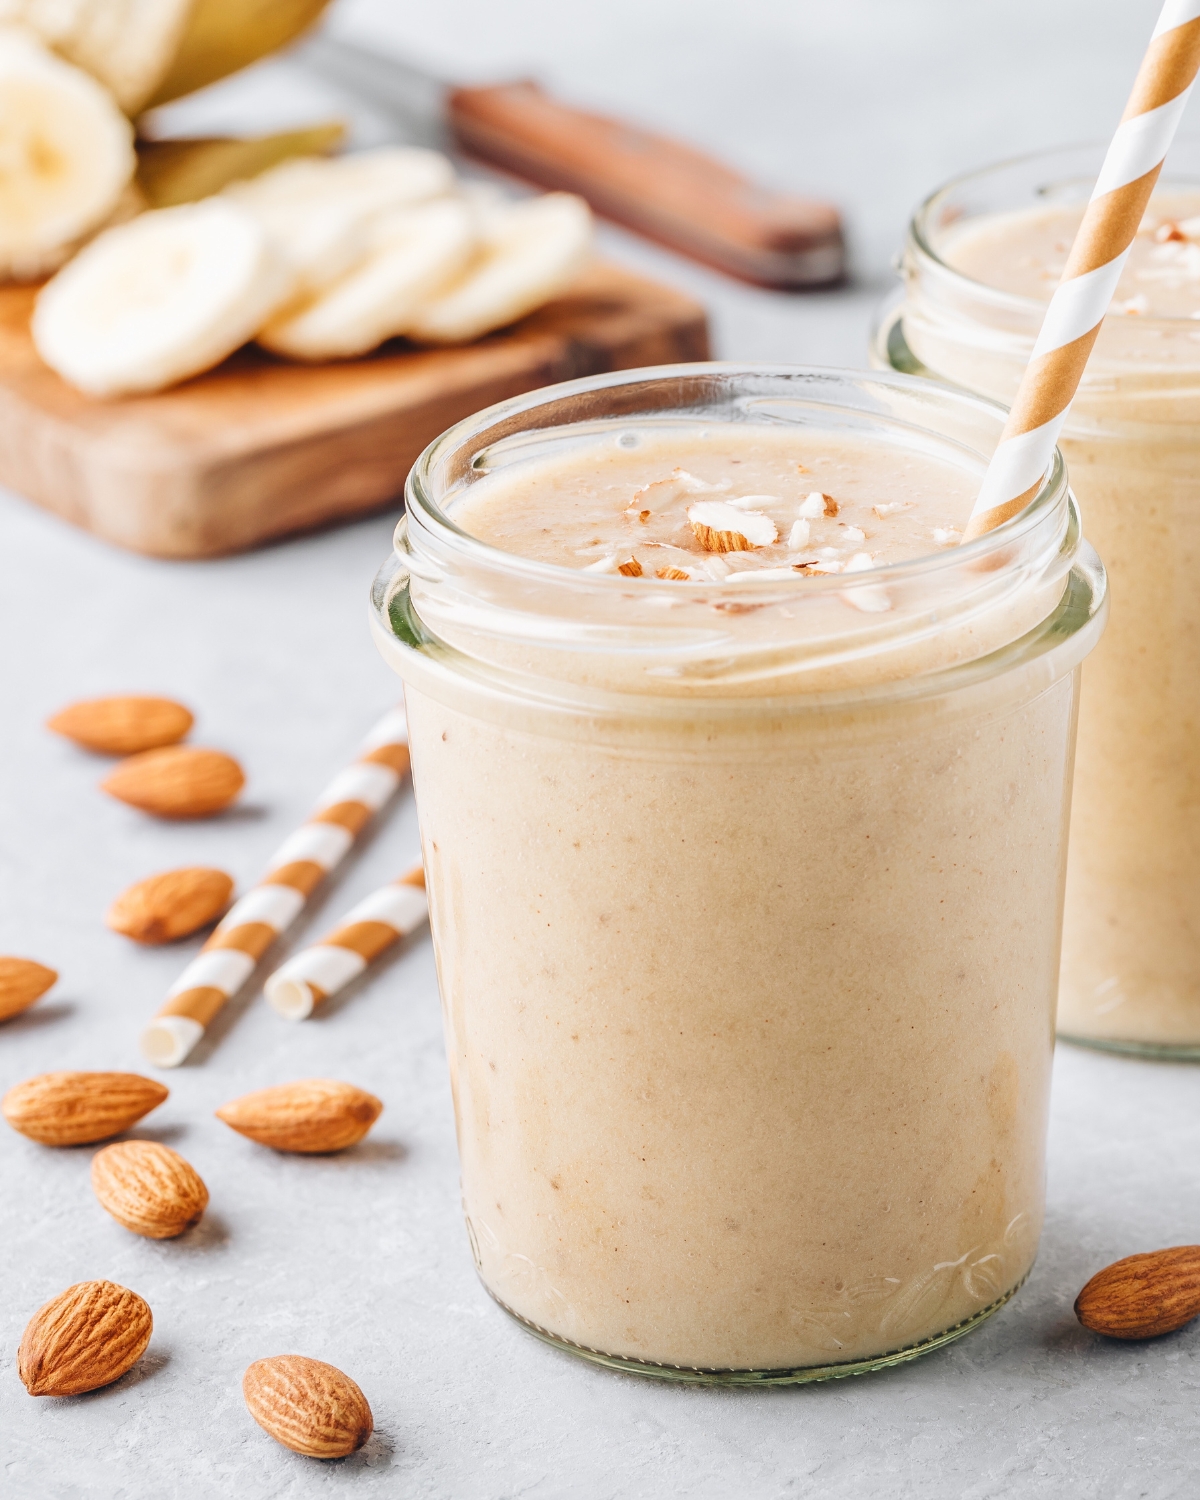 banana almond smoothie in a glass jar with a straw